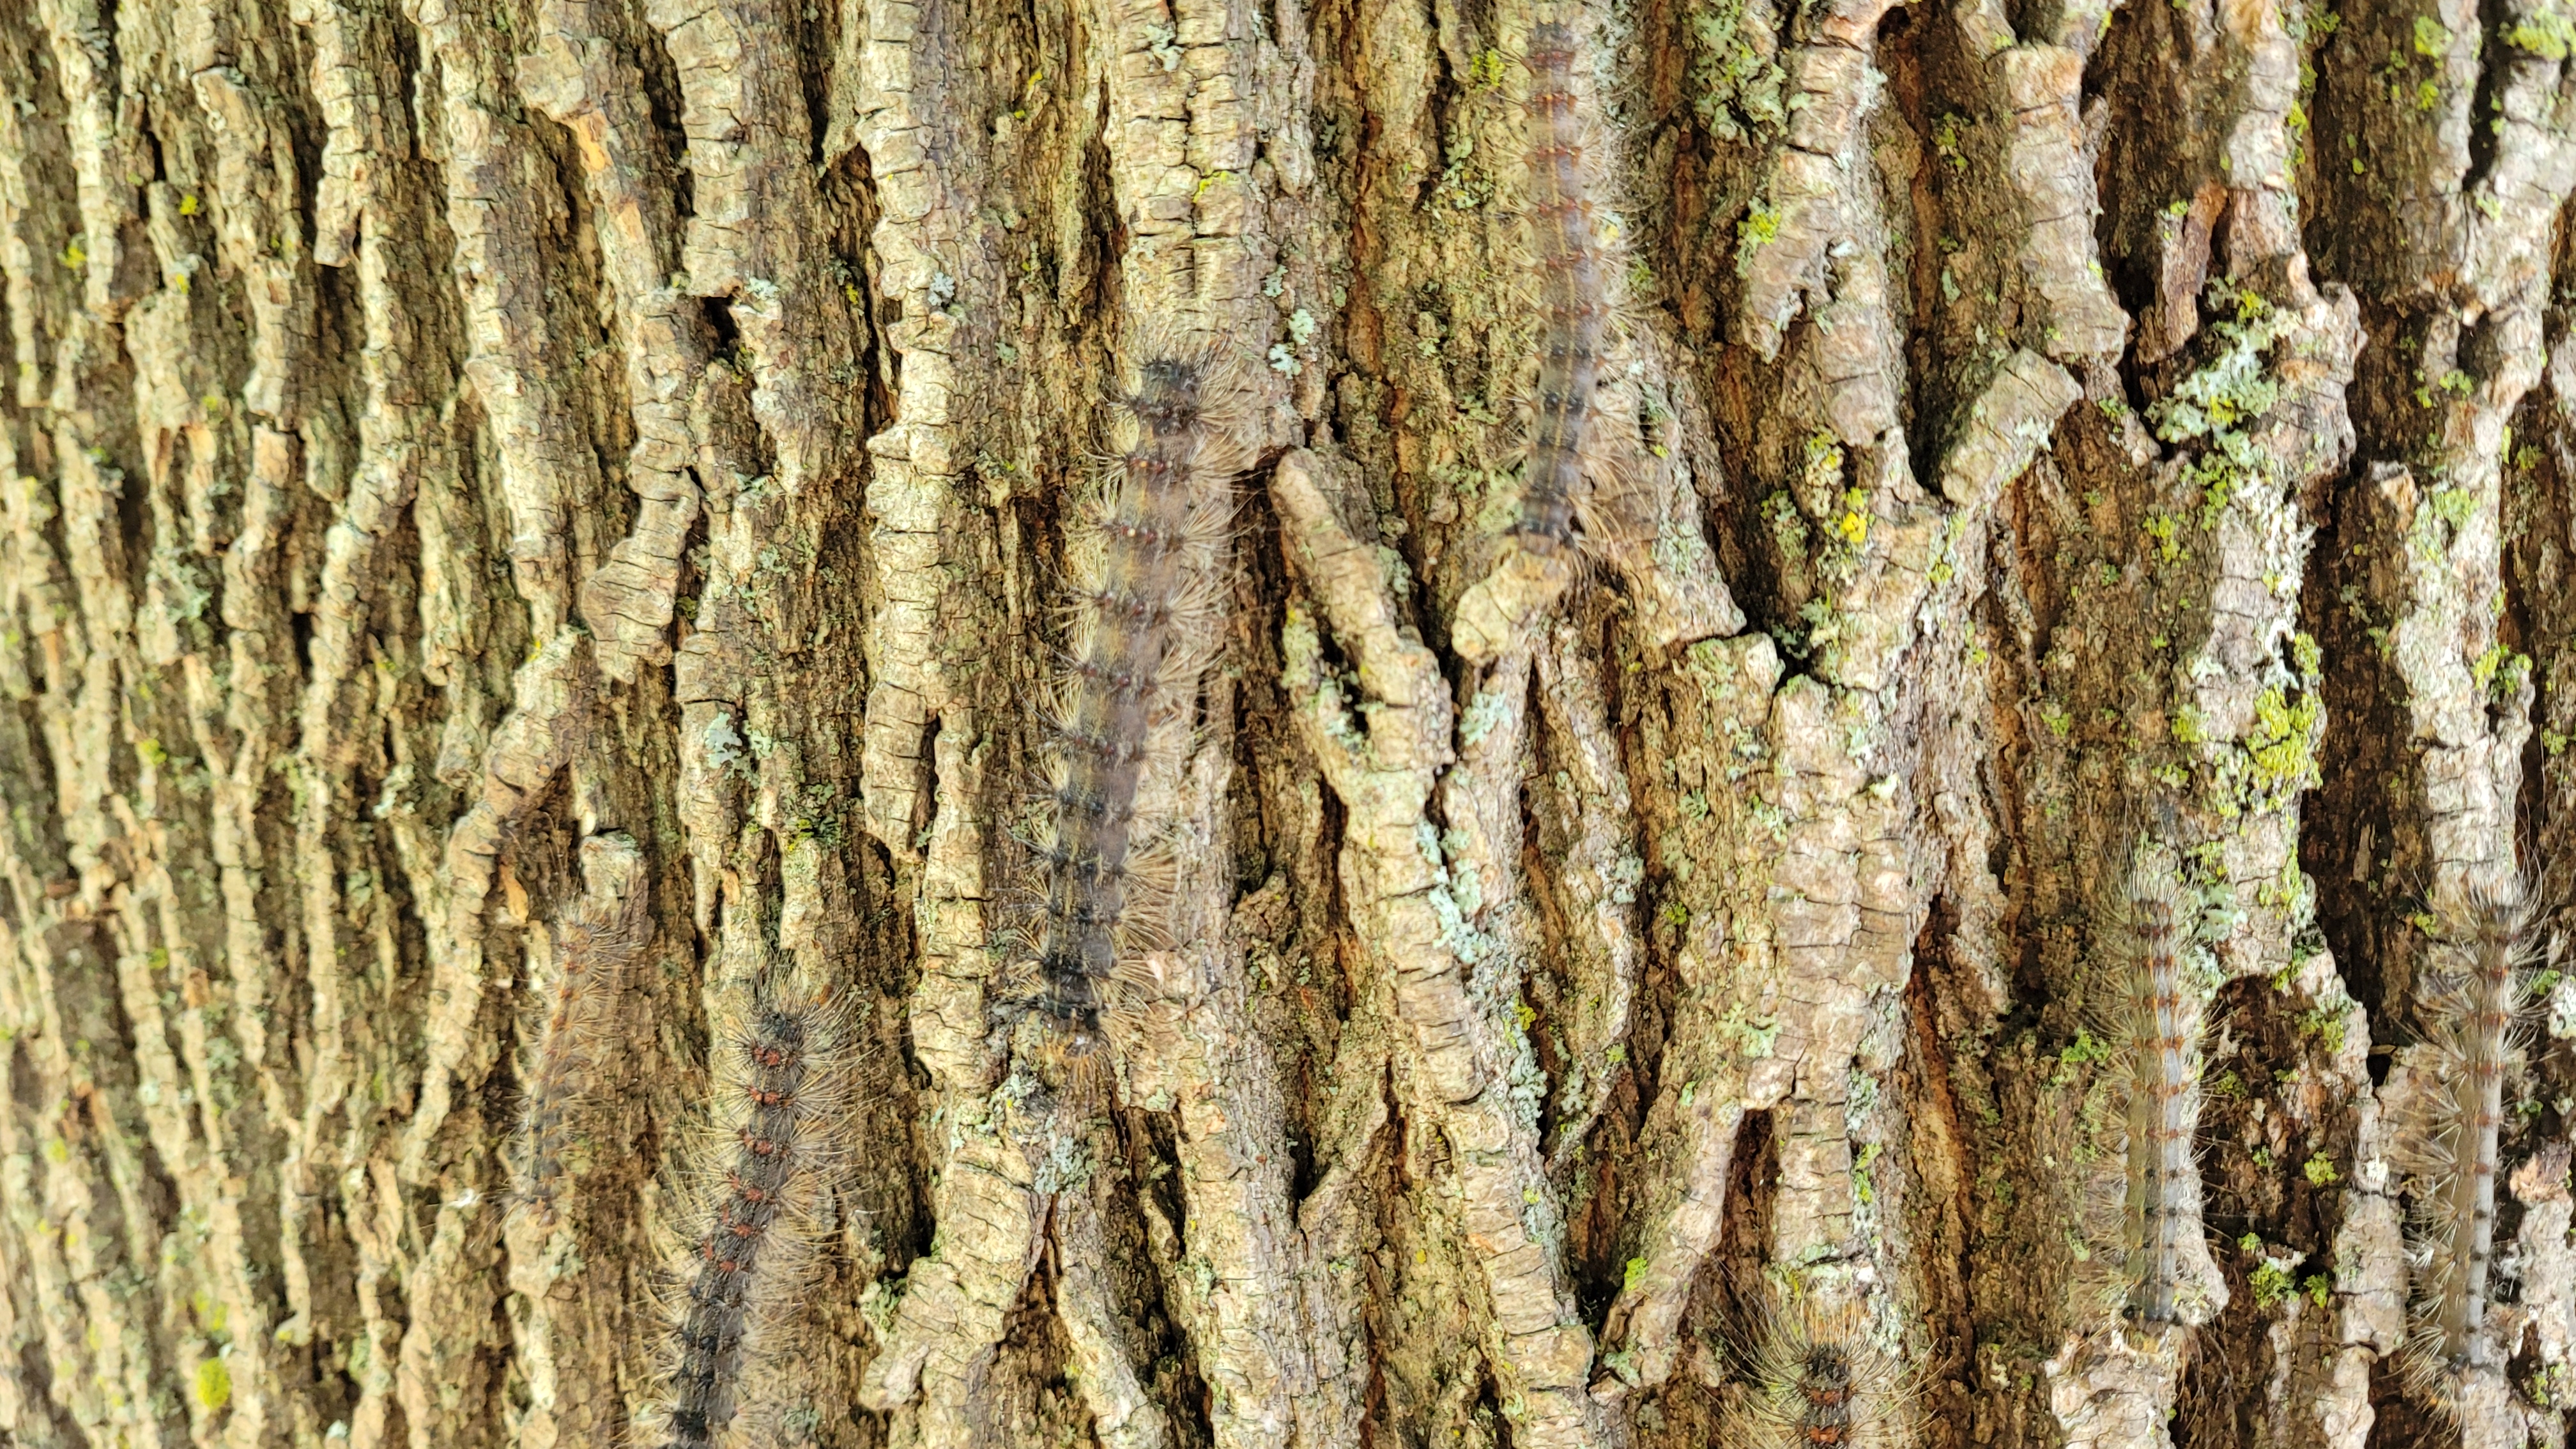 Several Gypsy Moth caterpillars make their way up a maple tree.